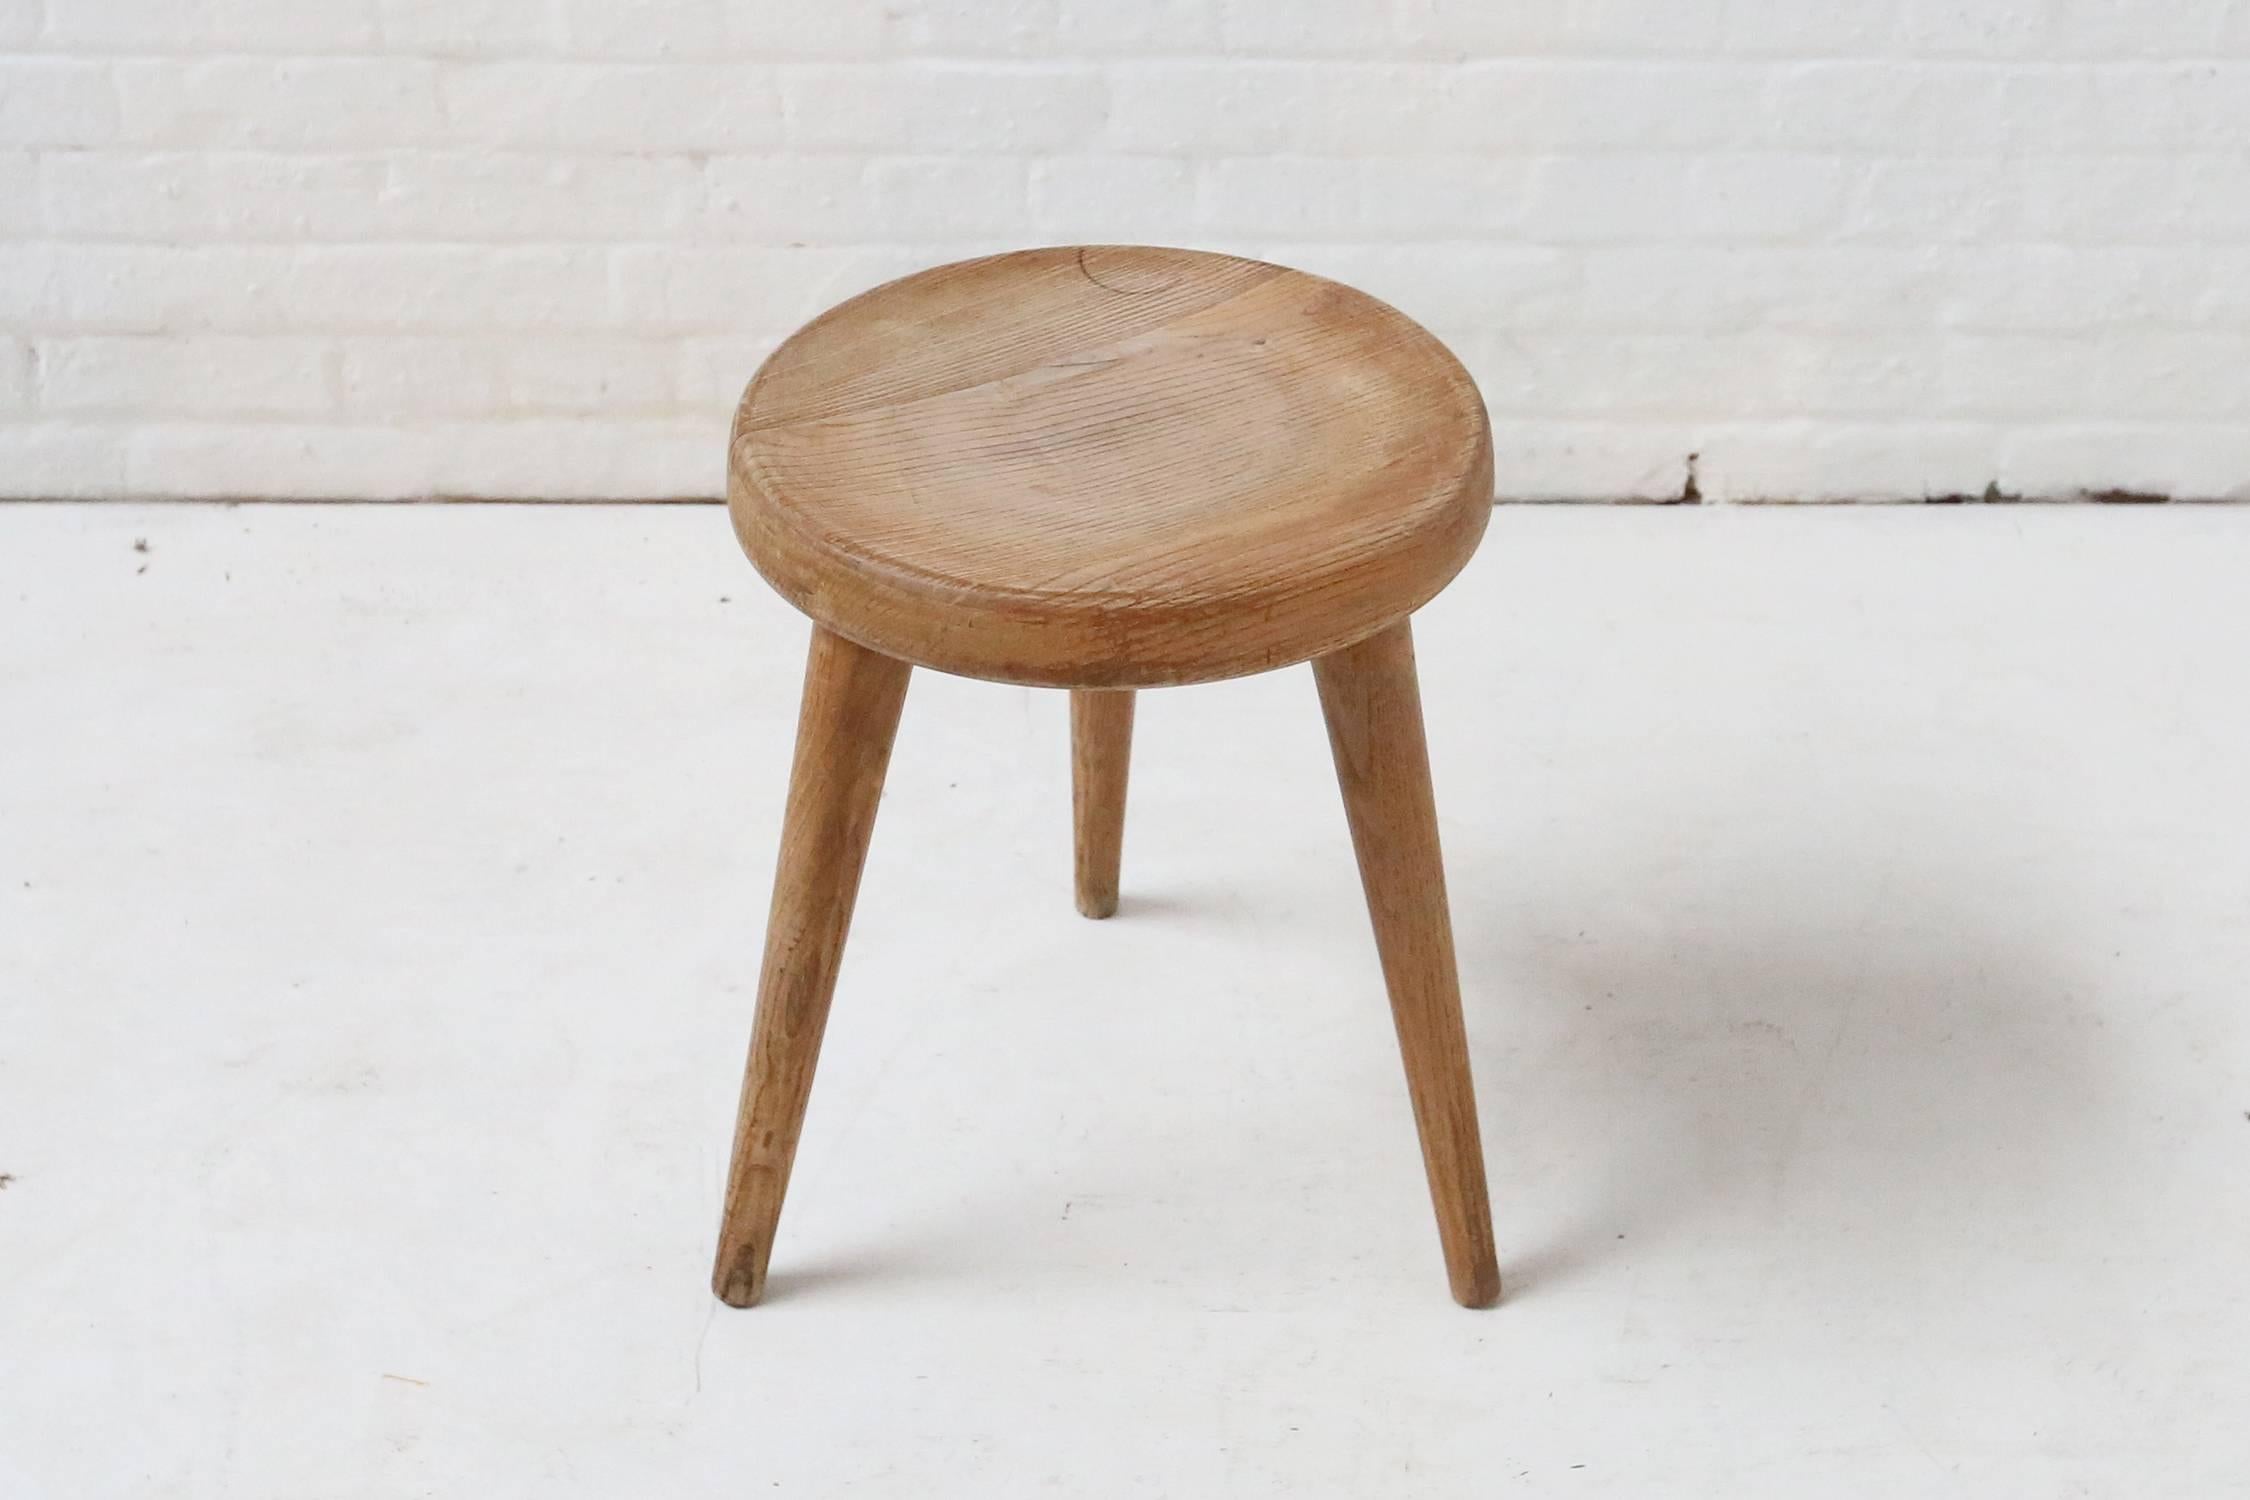 Charlotte Perriand tripod stool in Ashwood, in original unrestored condition
edition Georges Blanchon, circa 1947

Référence : 
Jacques Barsac, Charlotte Perriand: Complete Works Volume 2, 1940-1955, Paris, 2015, pp. 162-63, 169, 302-303, 305,